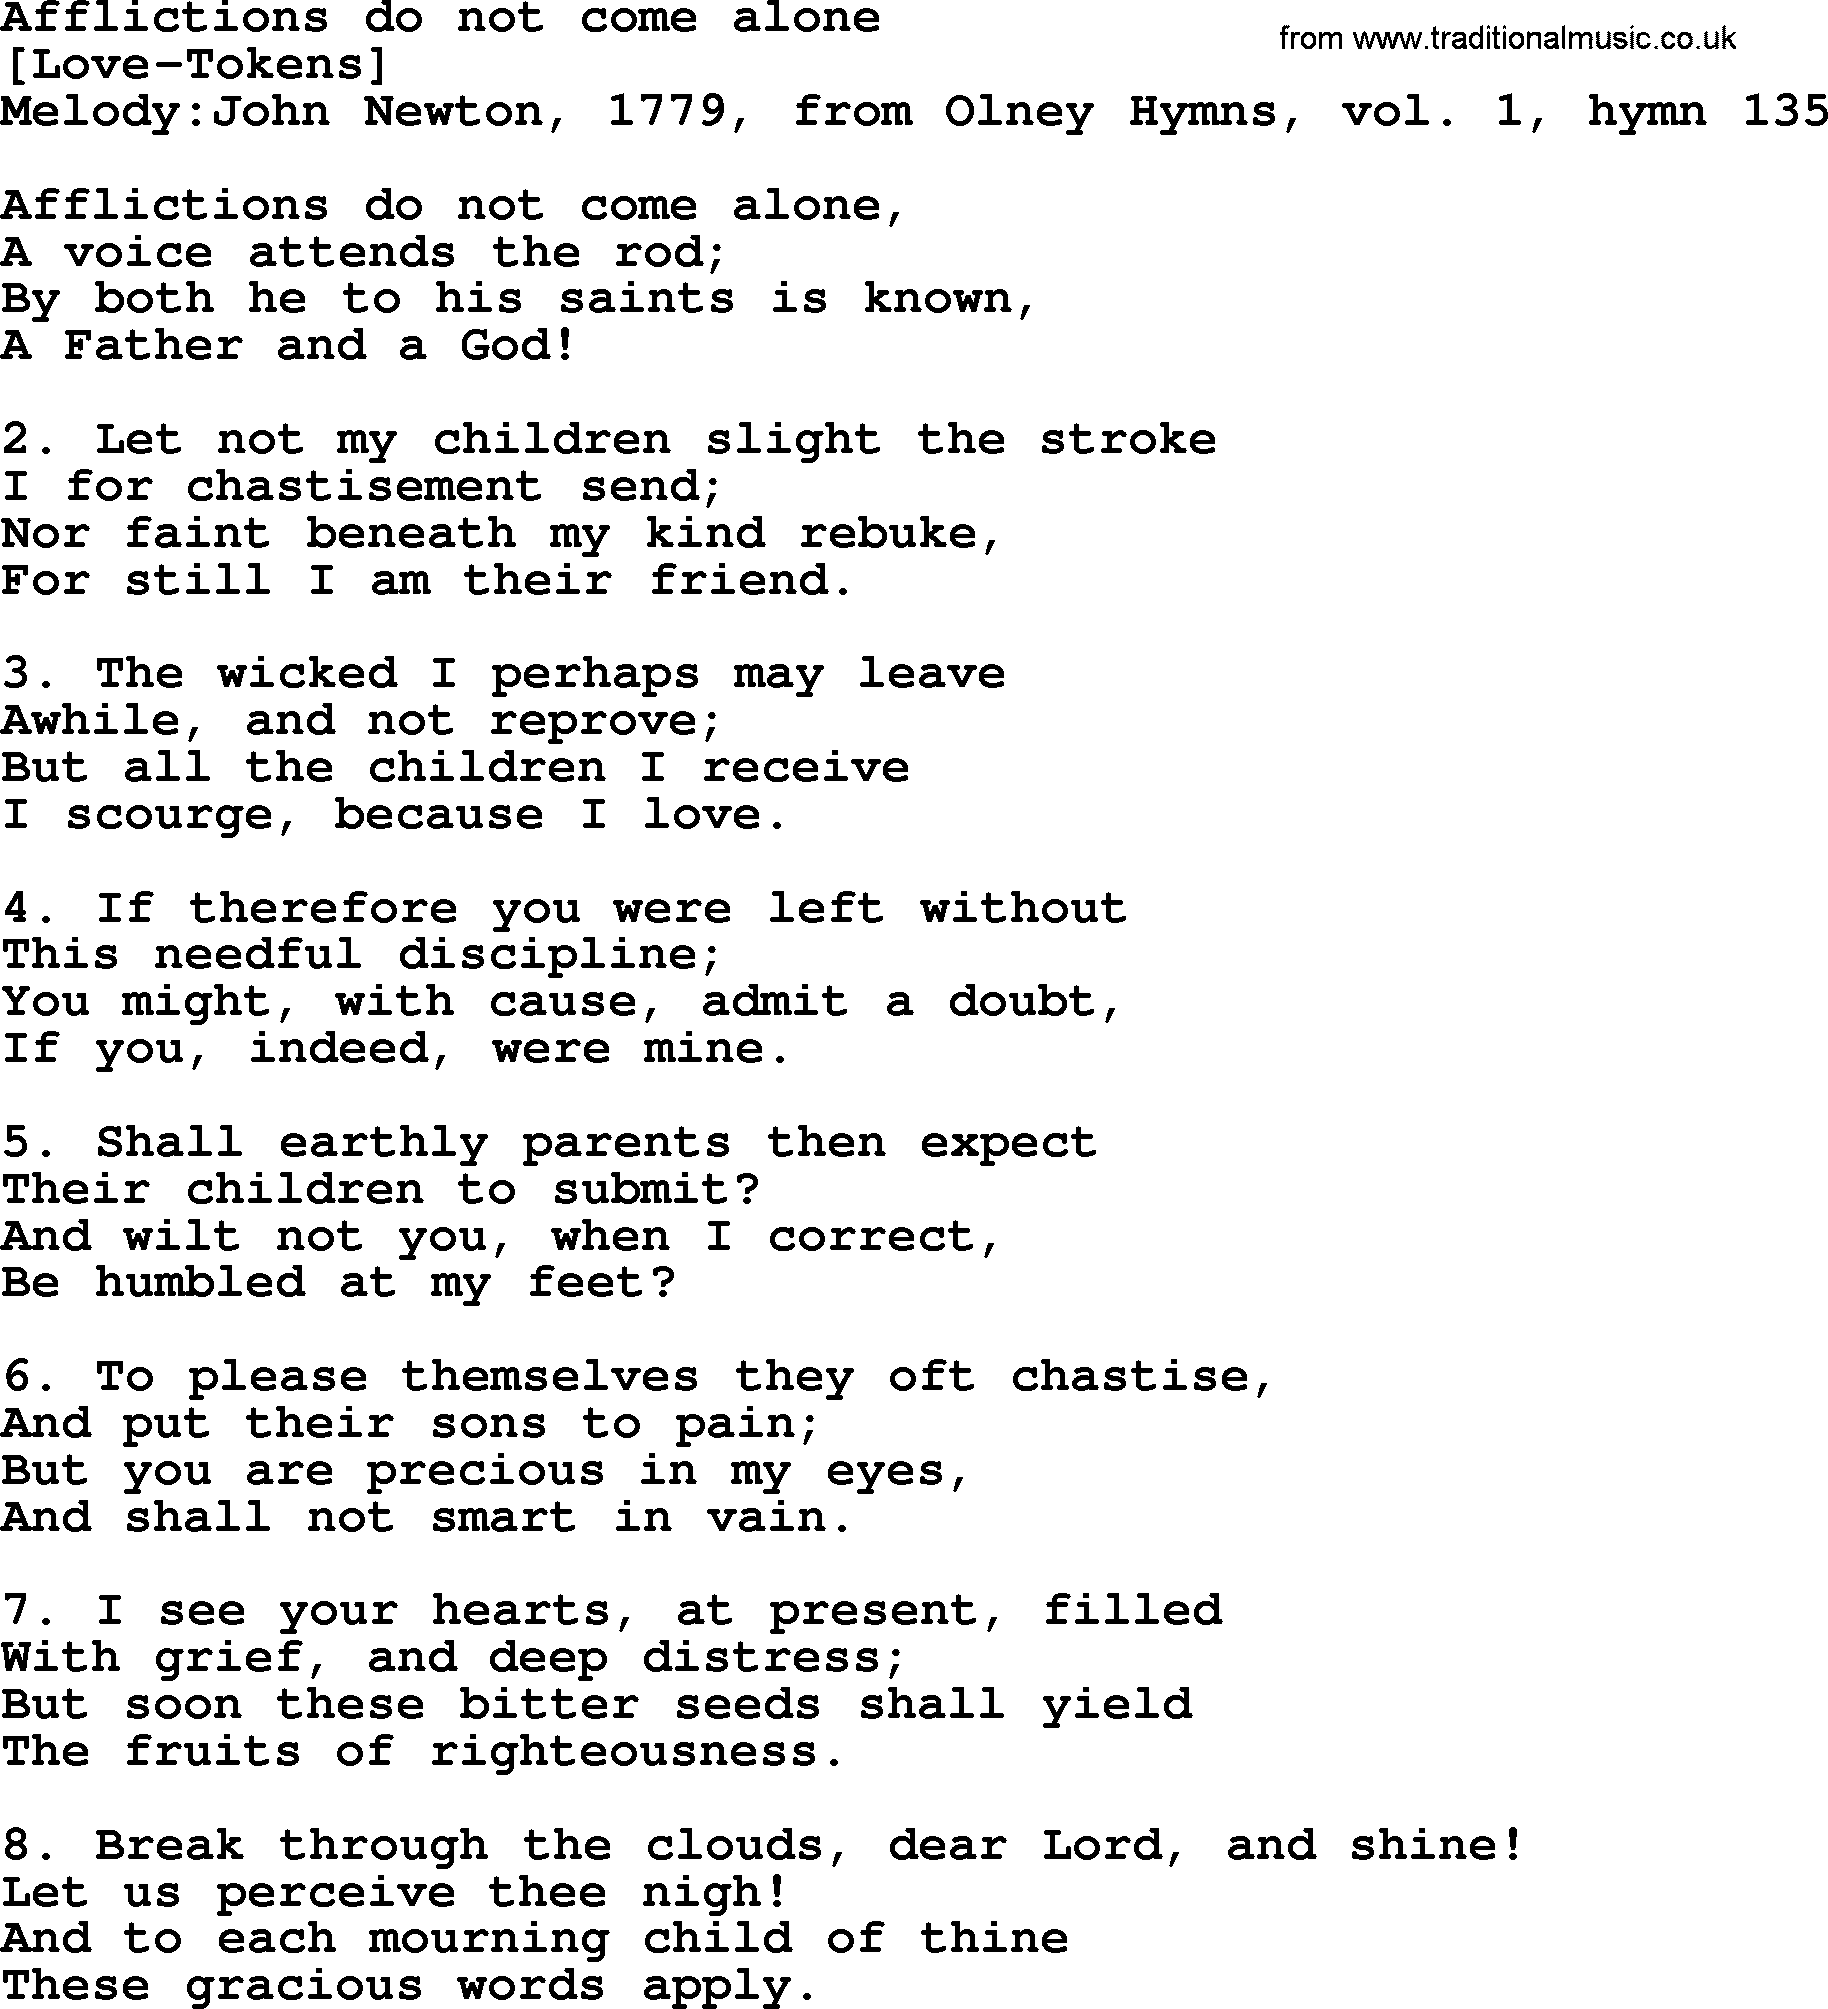 Old English Song: Afflictions Do Not Come Alone lyrics